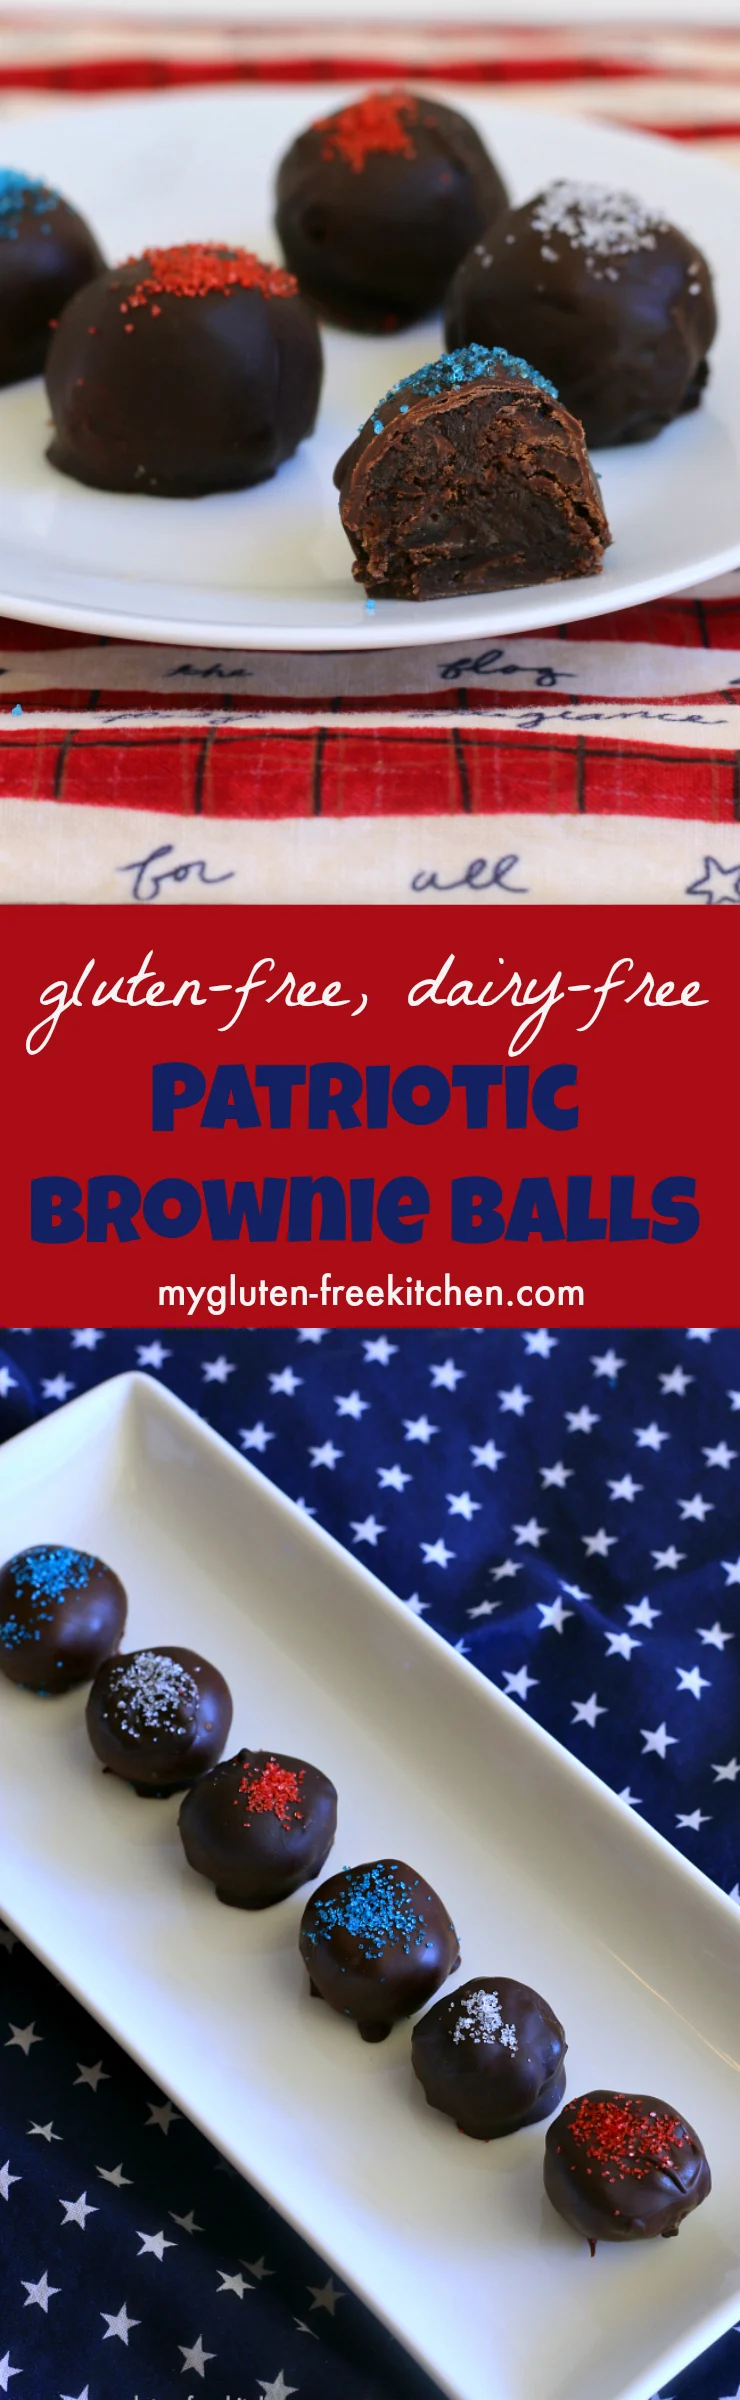 Gluten-free, dairy-free Patriotic Brownie Balls. Recipe for rich brownies coated with dark chocolate and patriotic sprinkles, perfect for summer parties!